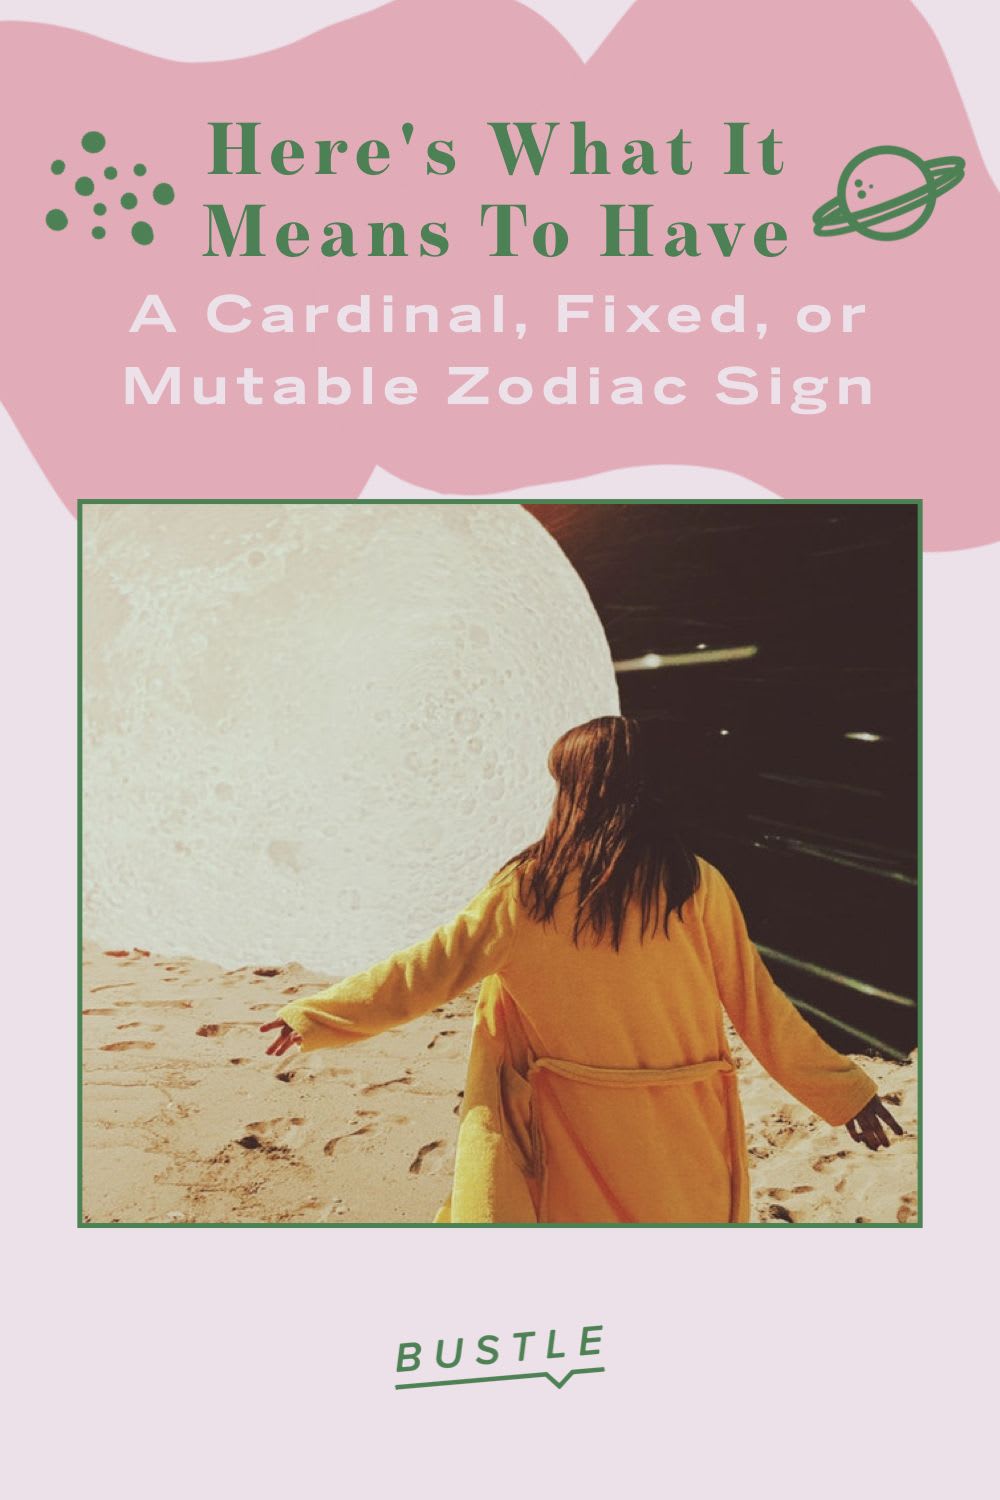 Here's What It Means To Have A Cardinal, Fixed, or Mutable Zodiac Sign